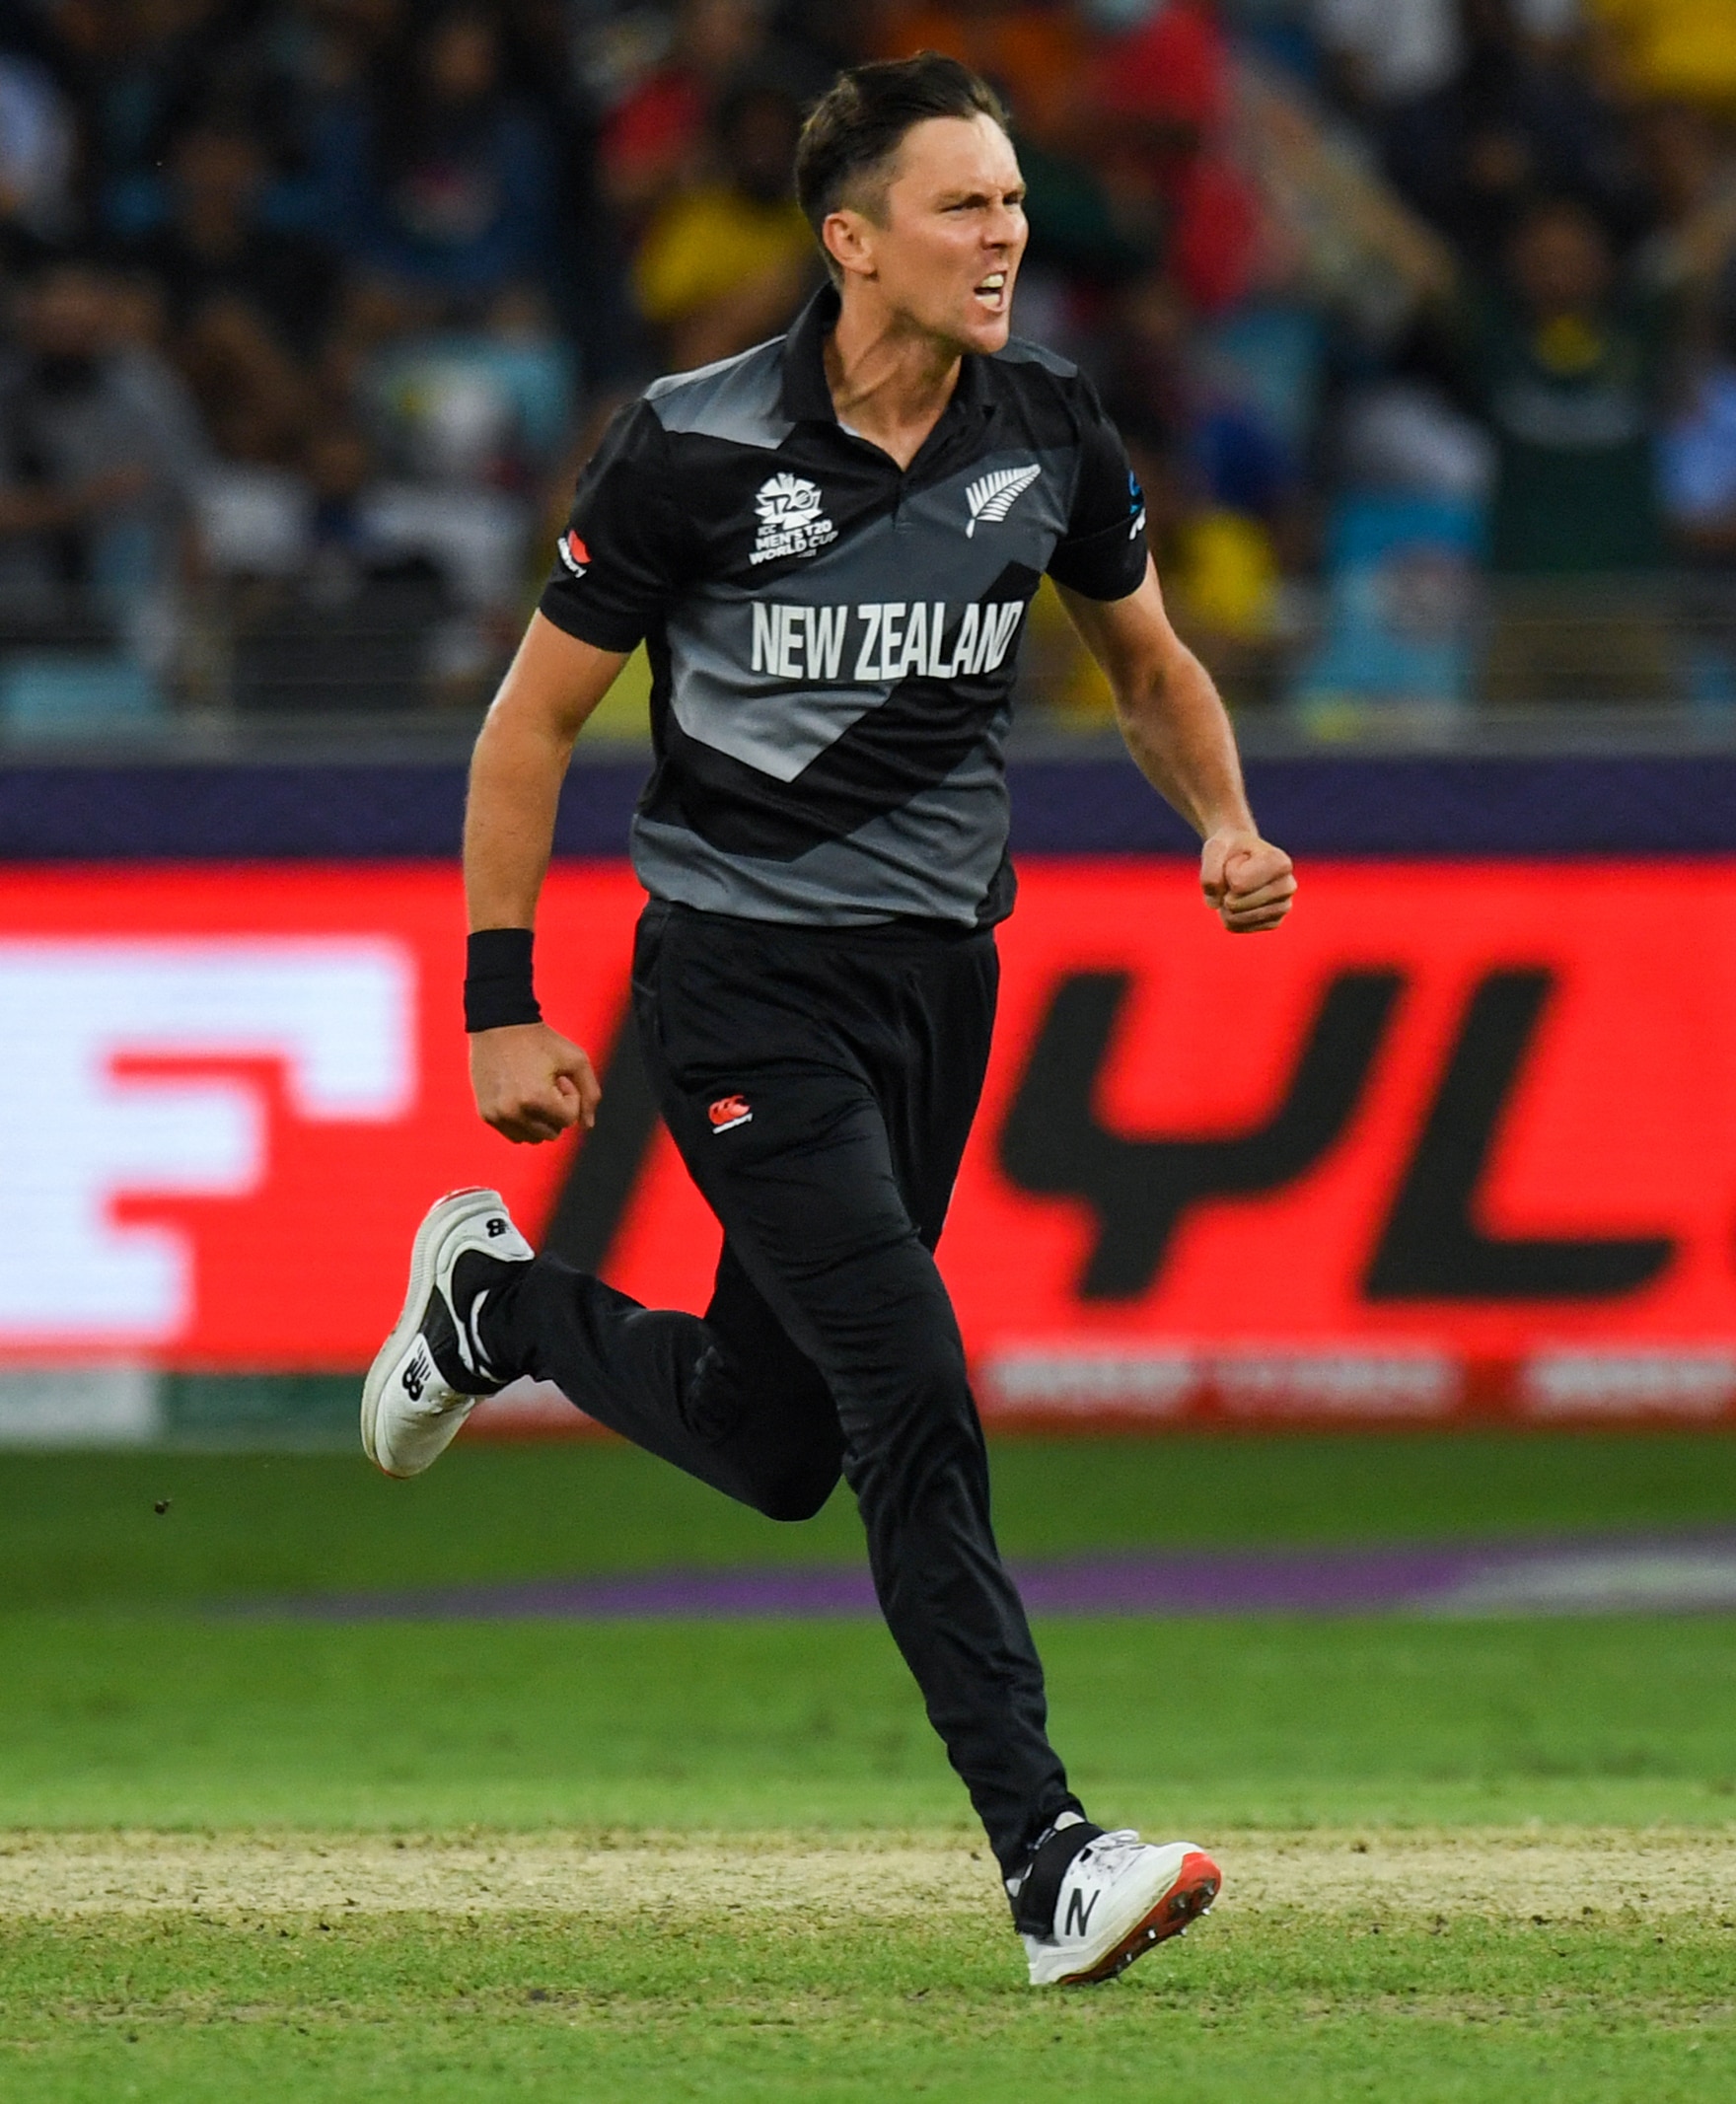 New Zealand's Trent Boult celebrates after bowling out Australia's David Warner (not pictured) during the ICC mens Twenty20 World Cup final match between Australia and New Zealand at the Dubai International Cricket Stadium in Dubai on November 14, 2021. (Photo by INDRANIL MUKHERJEE / AFP)